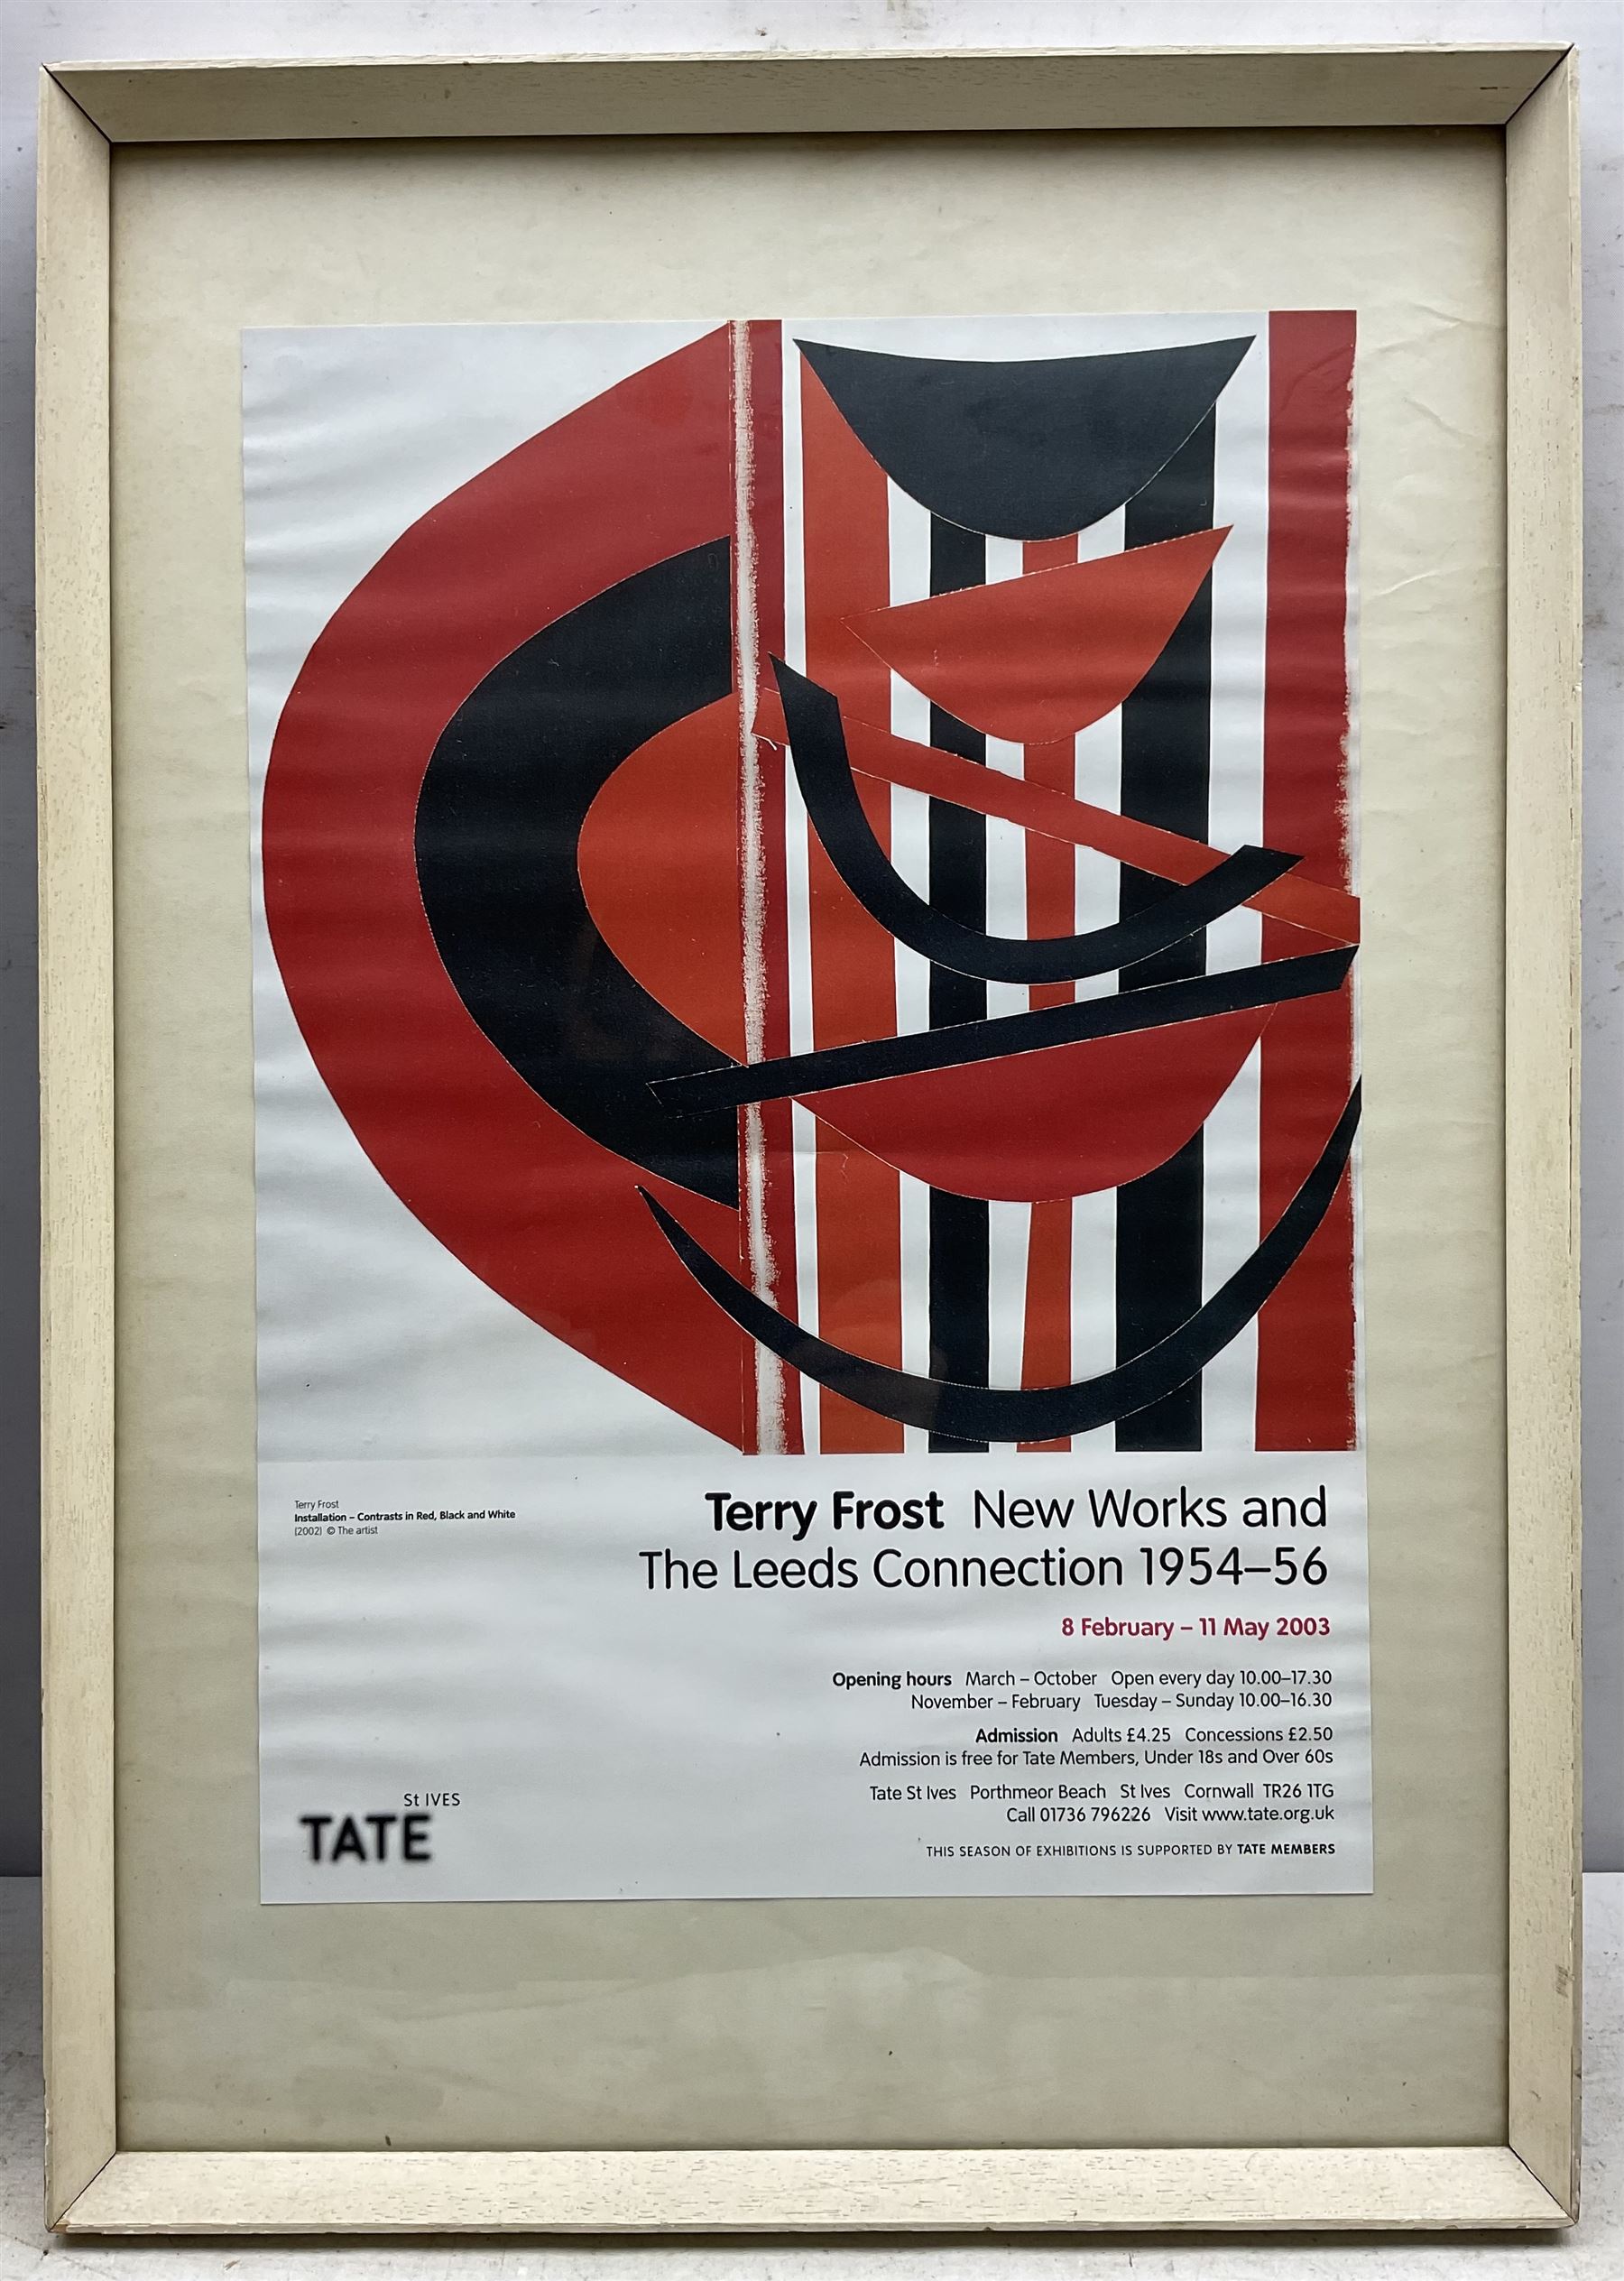 The Tate St Ives: 'Terry Frost - New Works and the Leeds Connection 1954-56' poster (2003) 42cm x 30 - Image 2 of 2